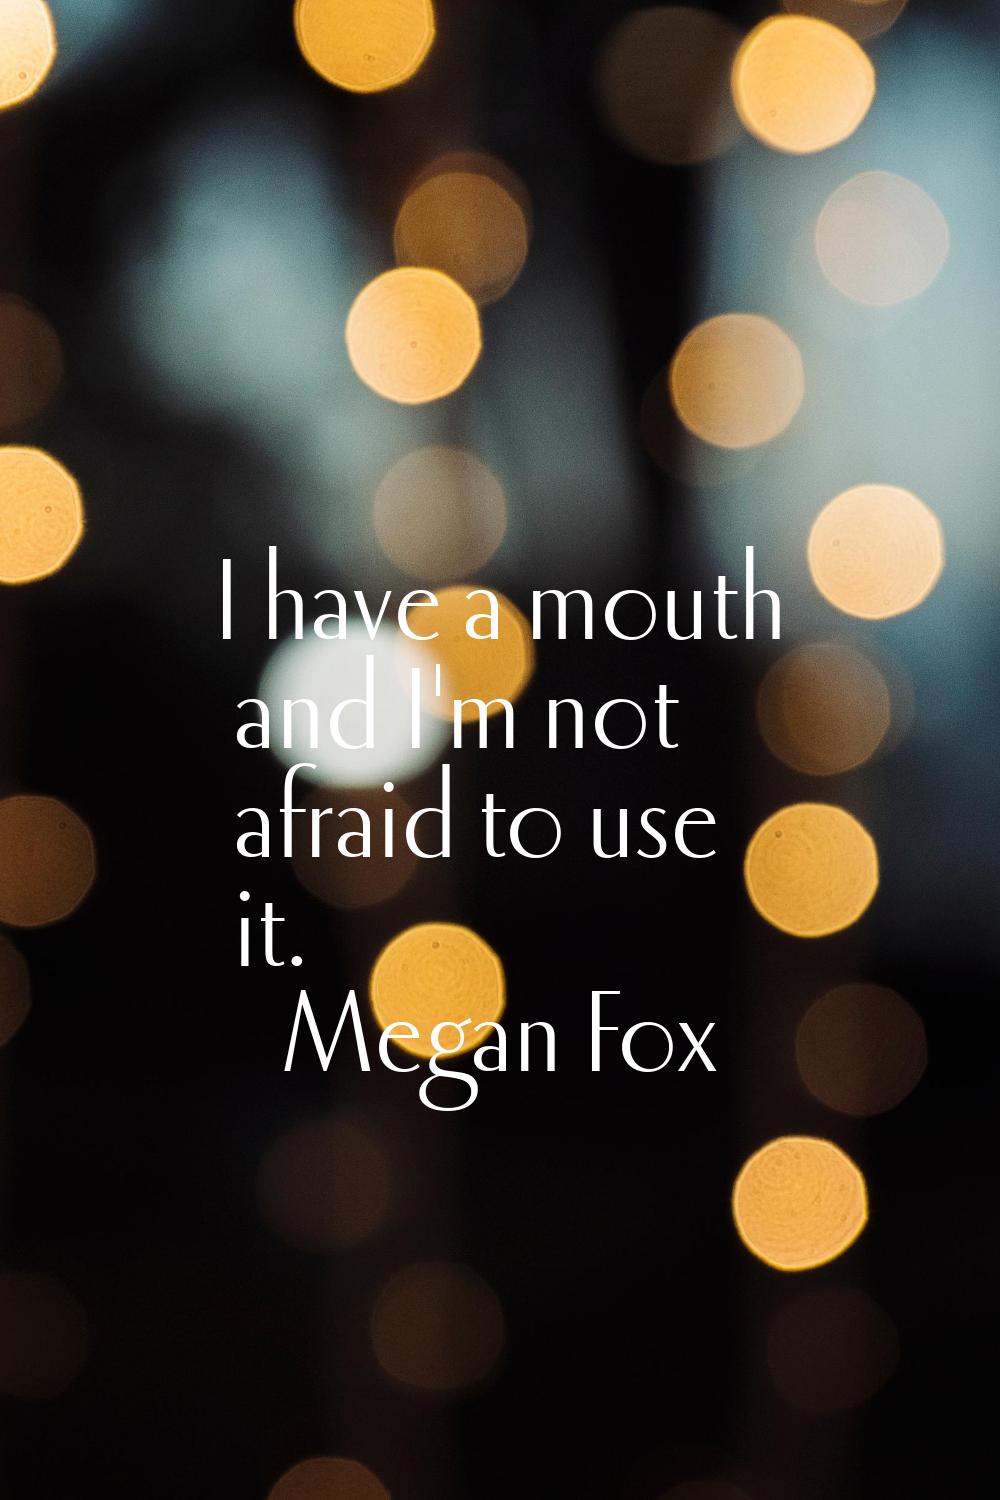 I have a mouth and I'm not afraid to use it.